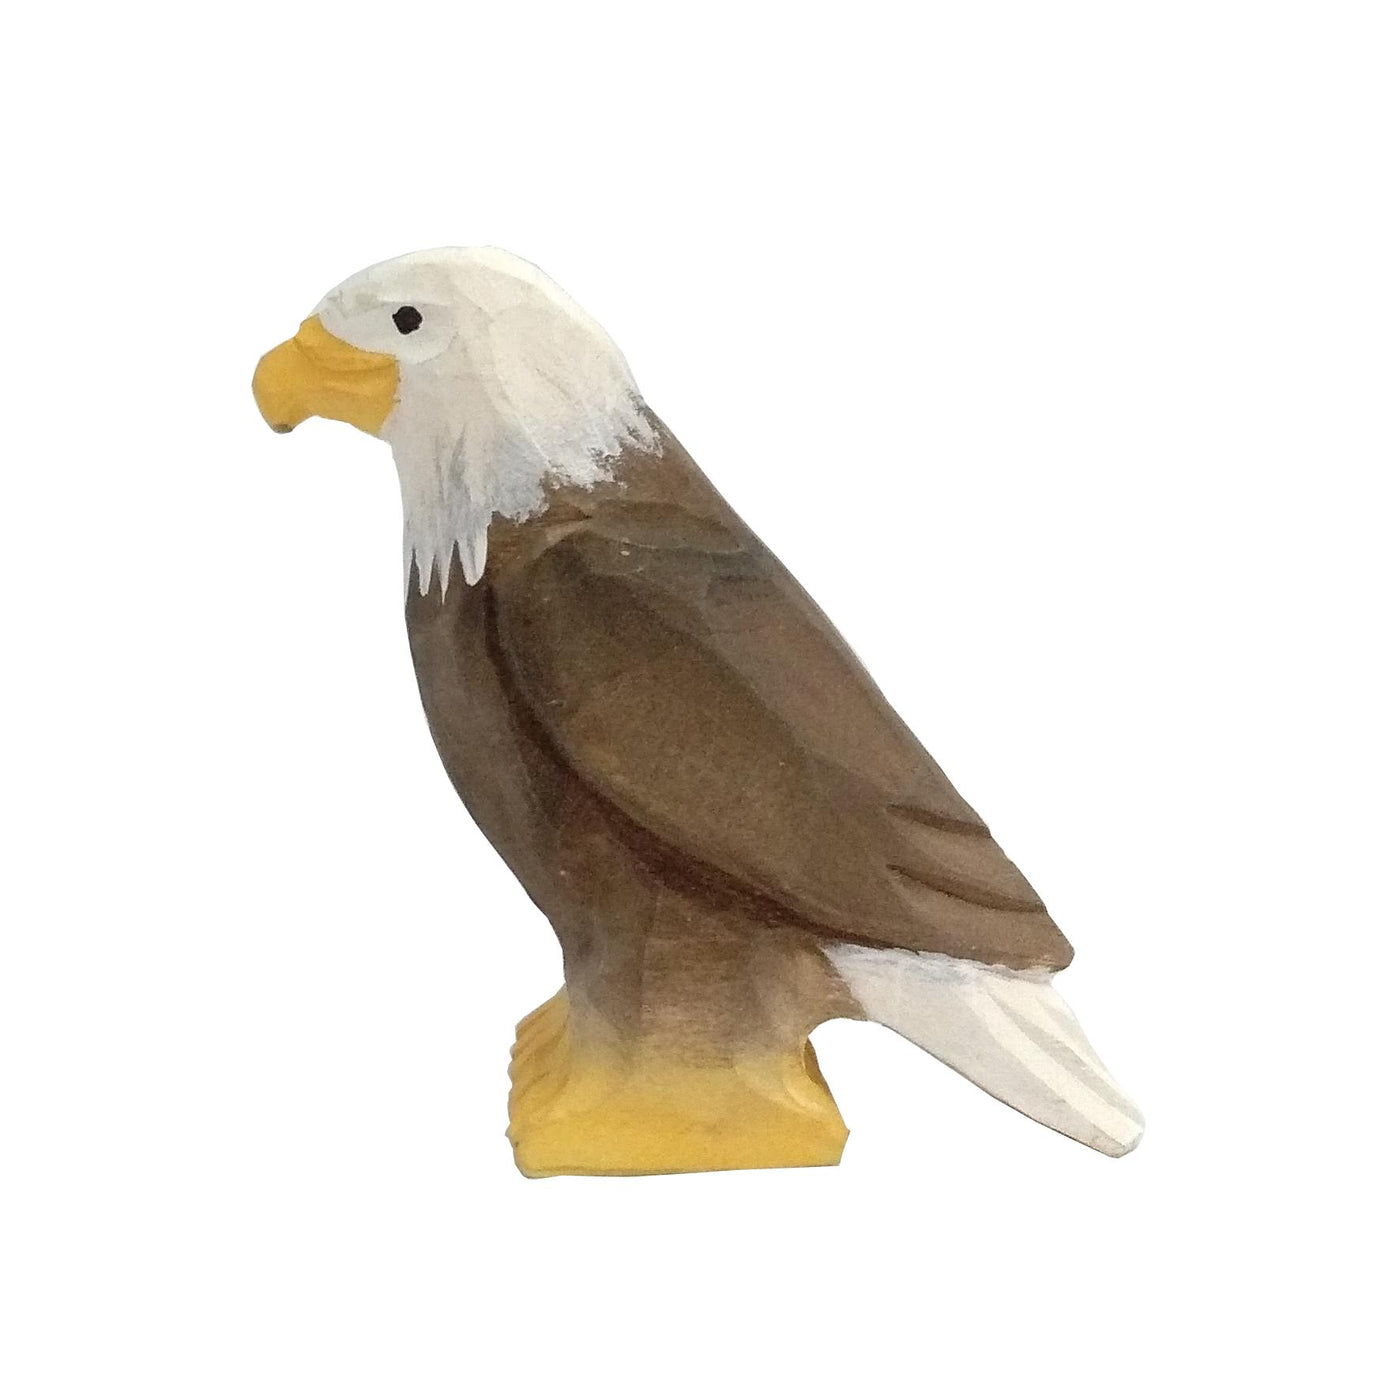 Wudimals® Wooden Eagle Animal Toy